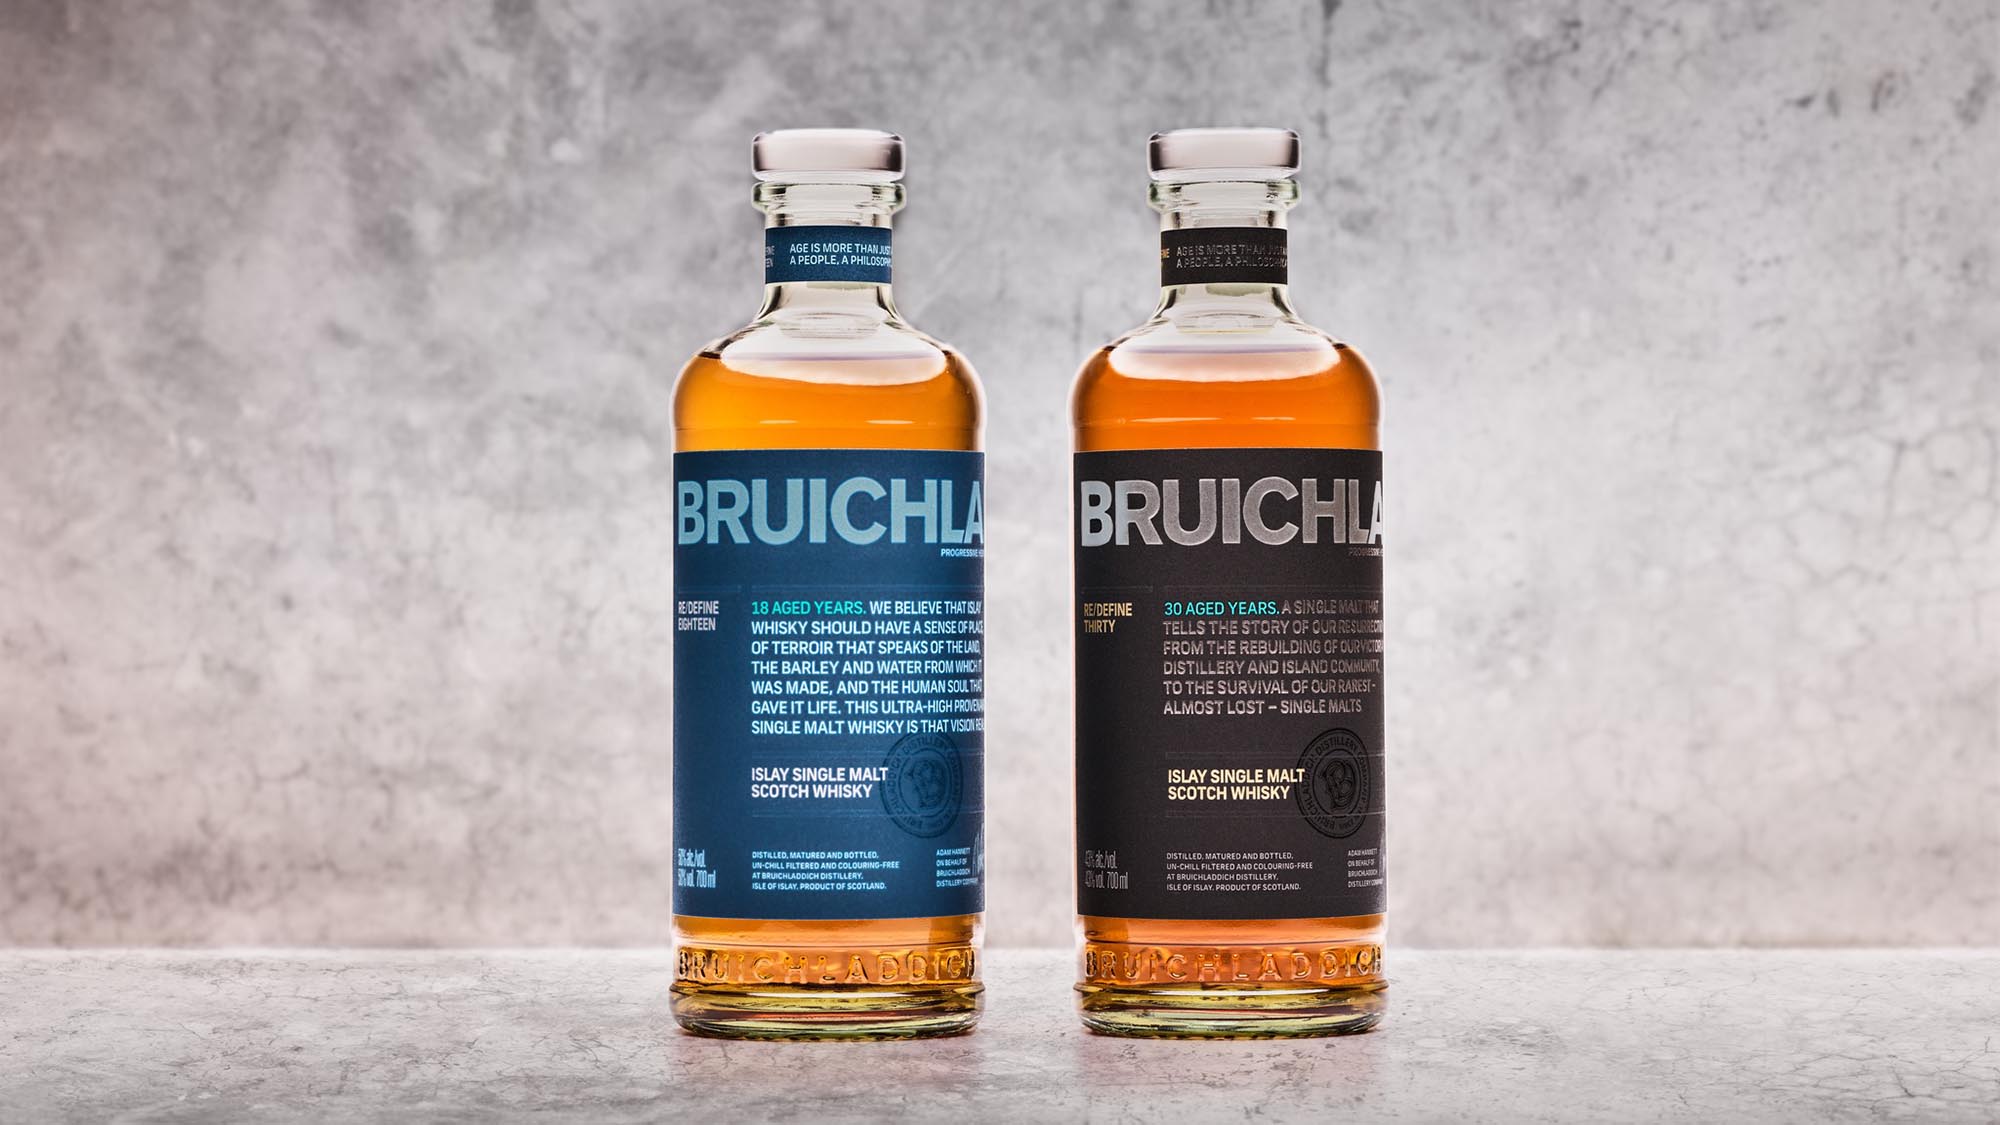 Bruichladdich Launches Luxury Redefined Range With 30-Year-Old And 18-Year-Old